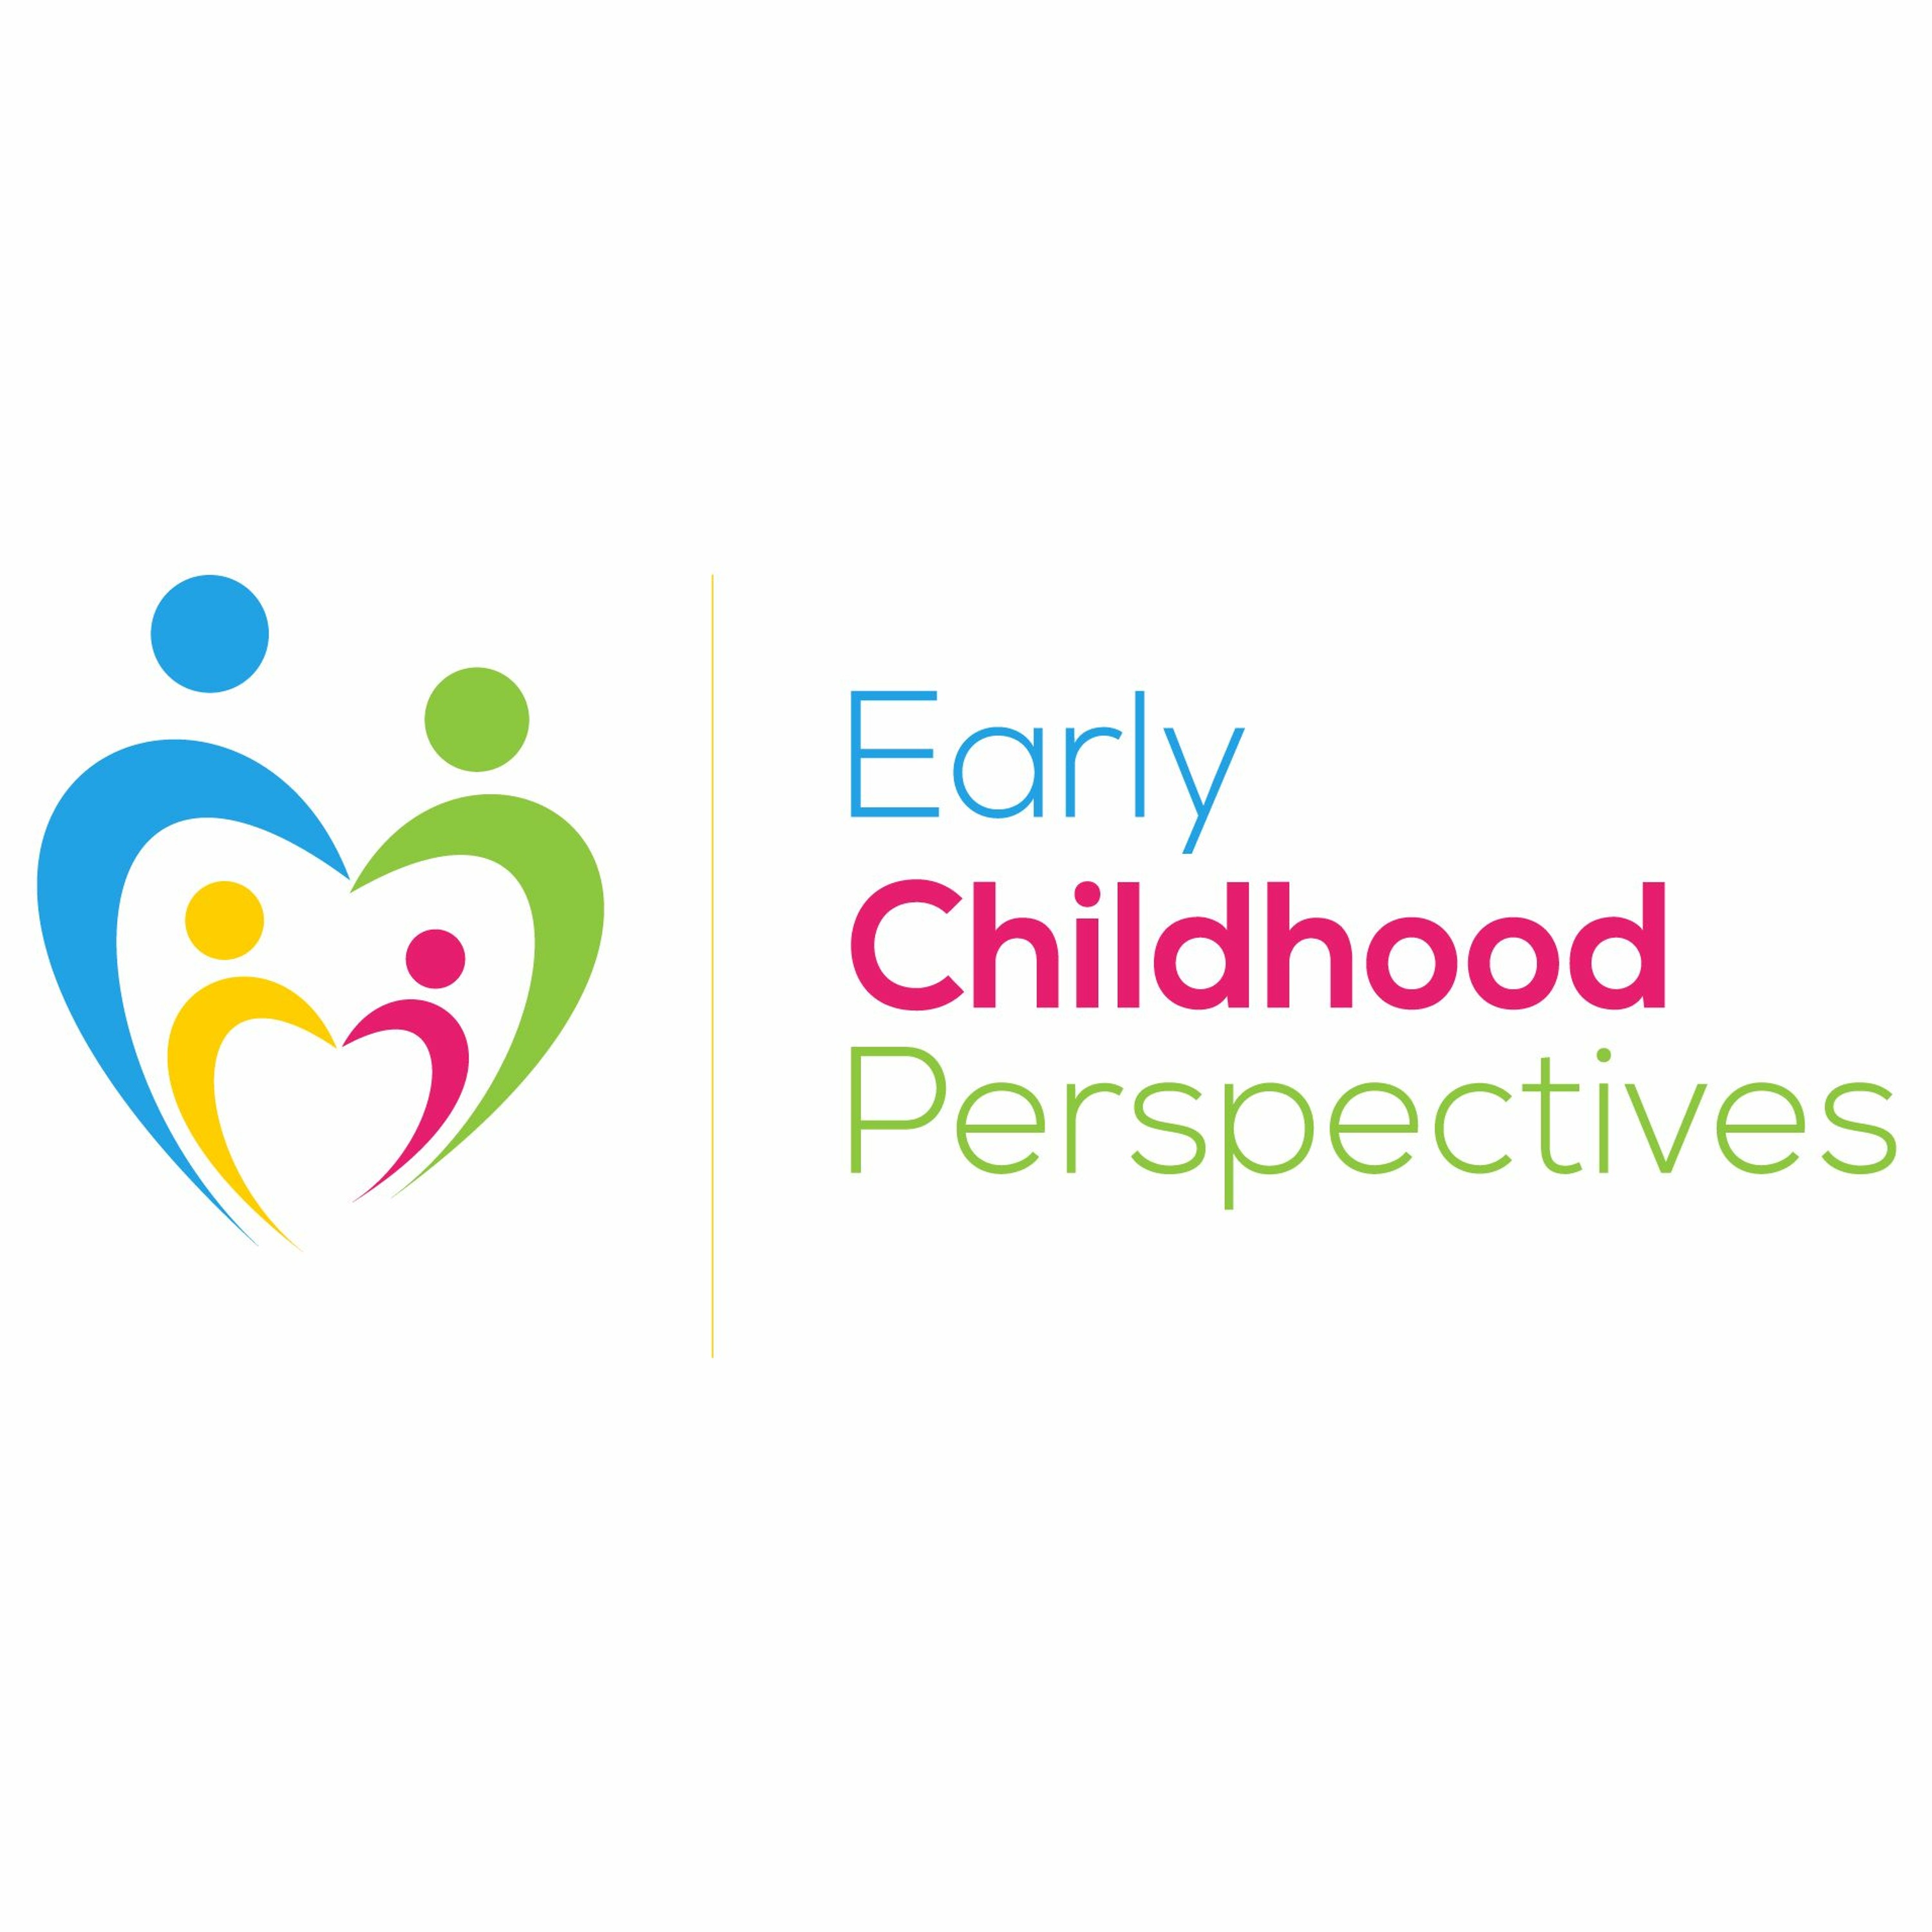 Early Childhood Perspectives #30: Assisting Children with Sensory Difficulties